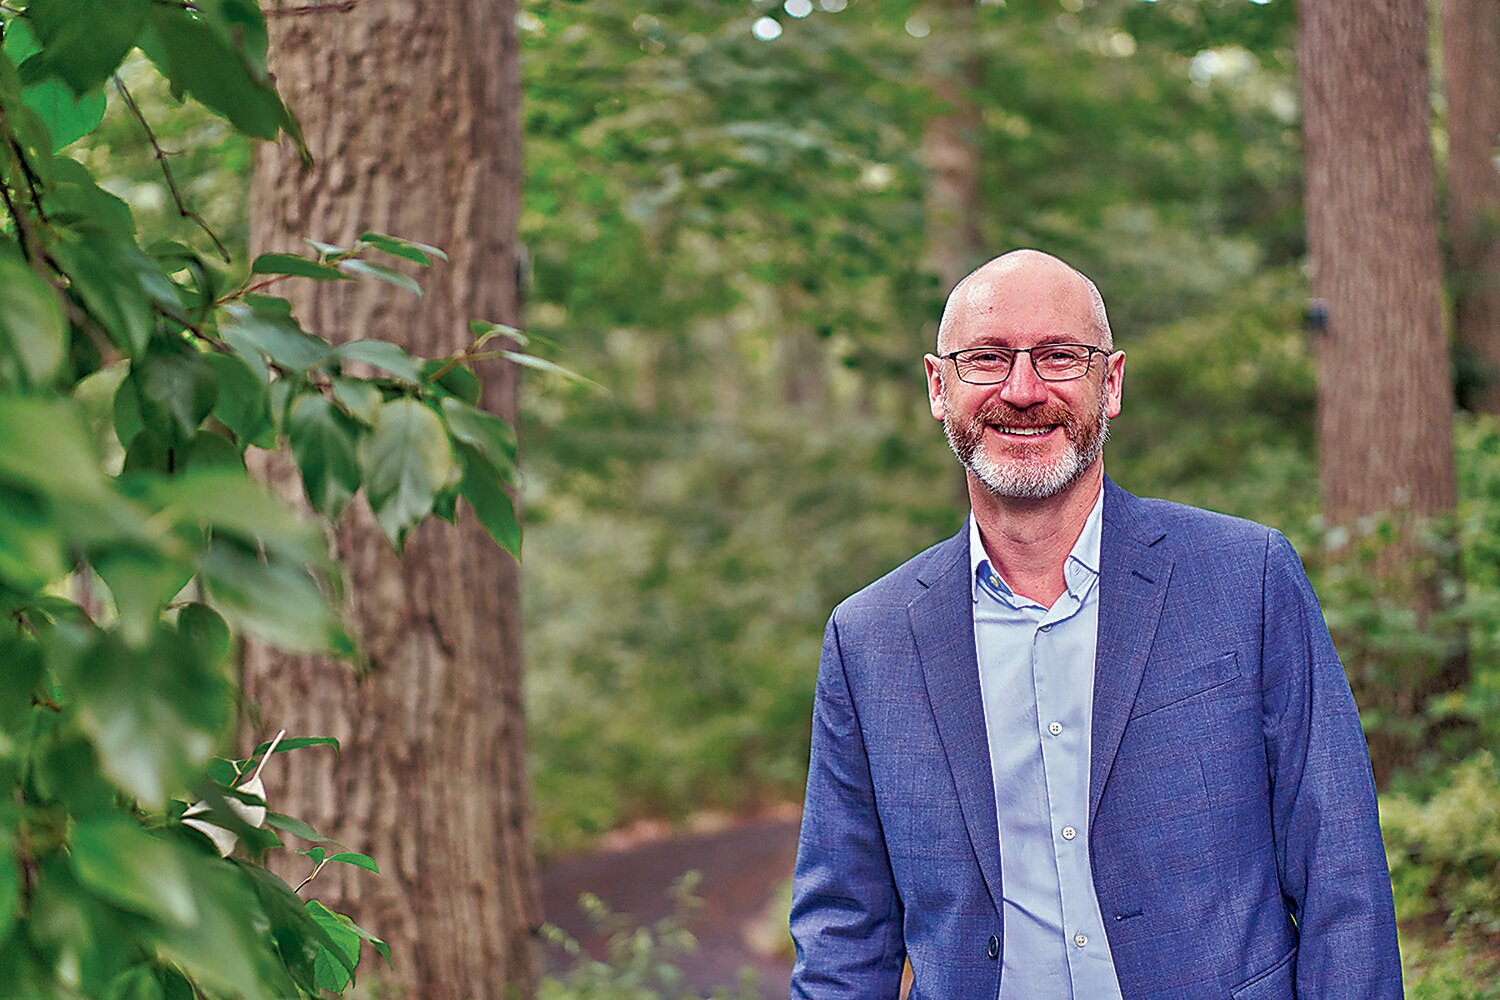 Tom Smarr, executive director of Jenkins Arboretum & Gardens, will present at Bucks County Community College’s Tyler Formal Gardens & Landscaping Lecture.